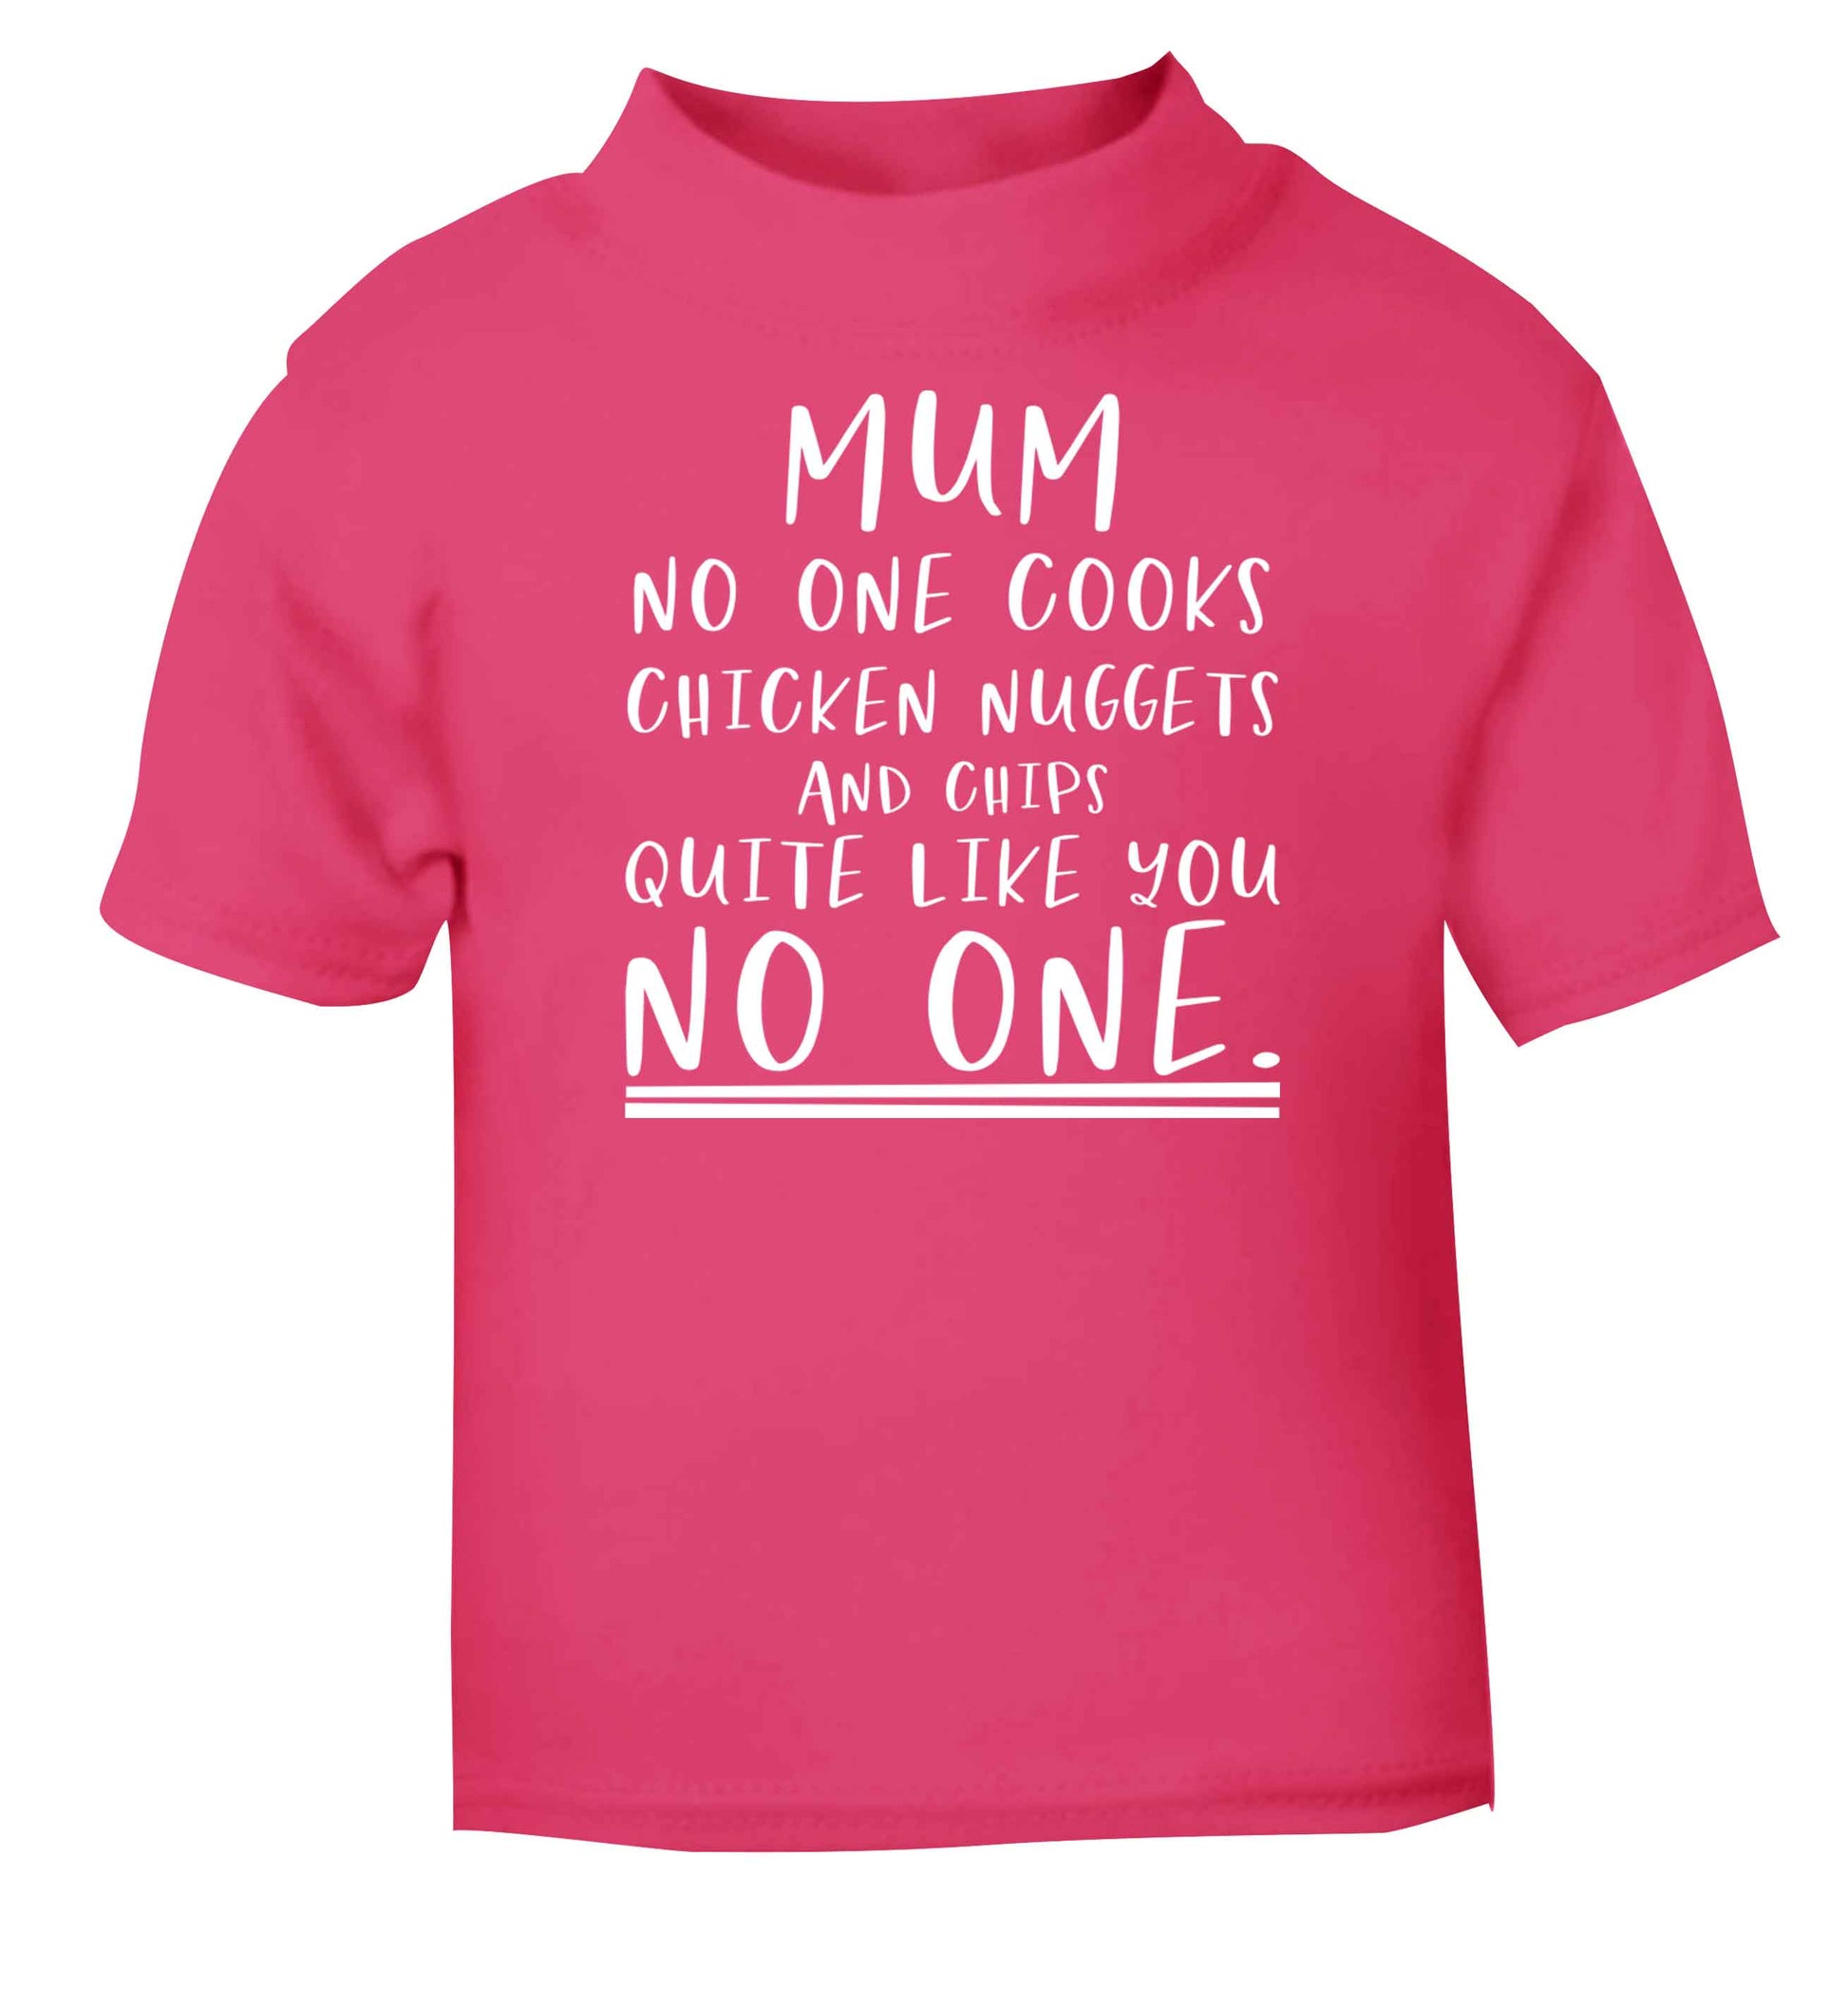 Super funny sassy gift for mother's day or birthday!  Mum no one cooks chicken nuggets and chips like you no one pink baby toddler Tshirt 2 Years